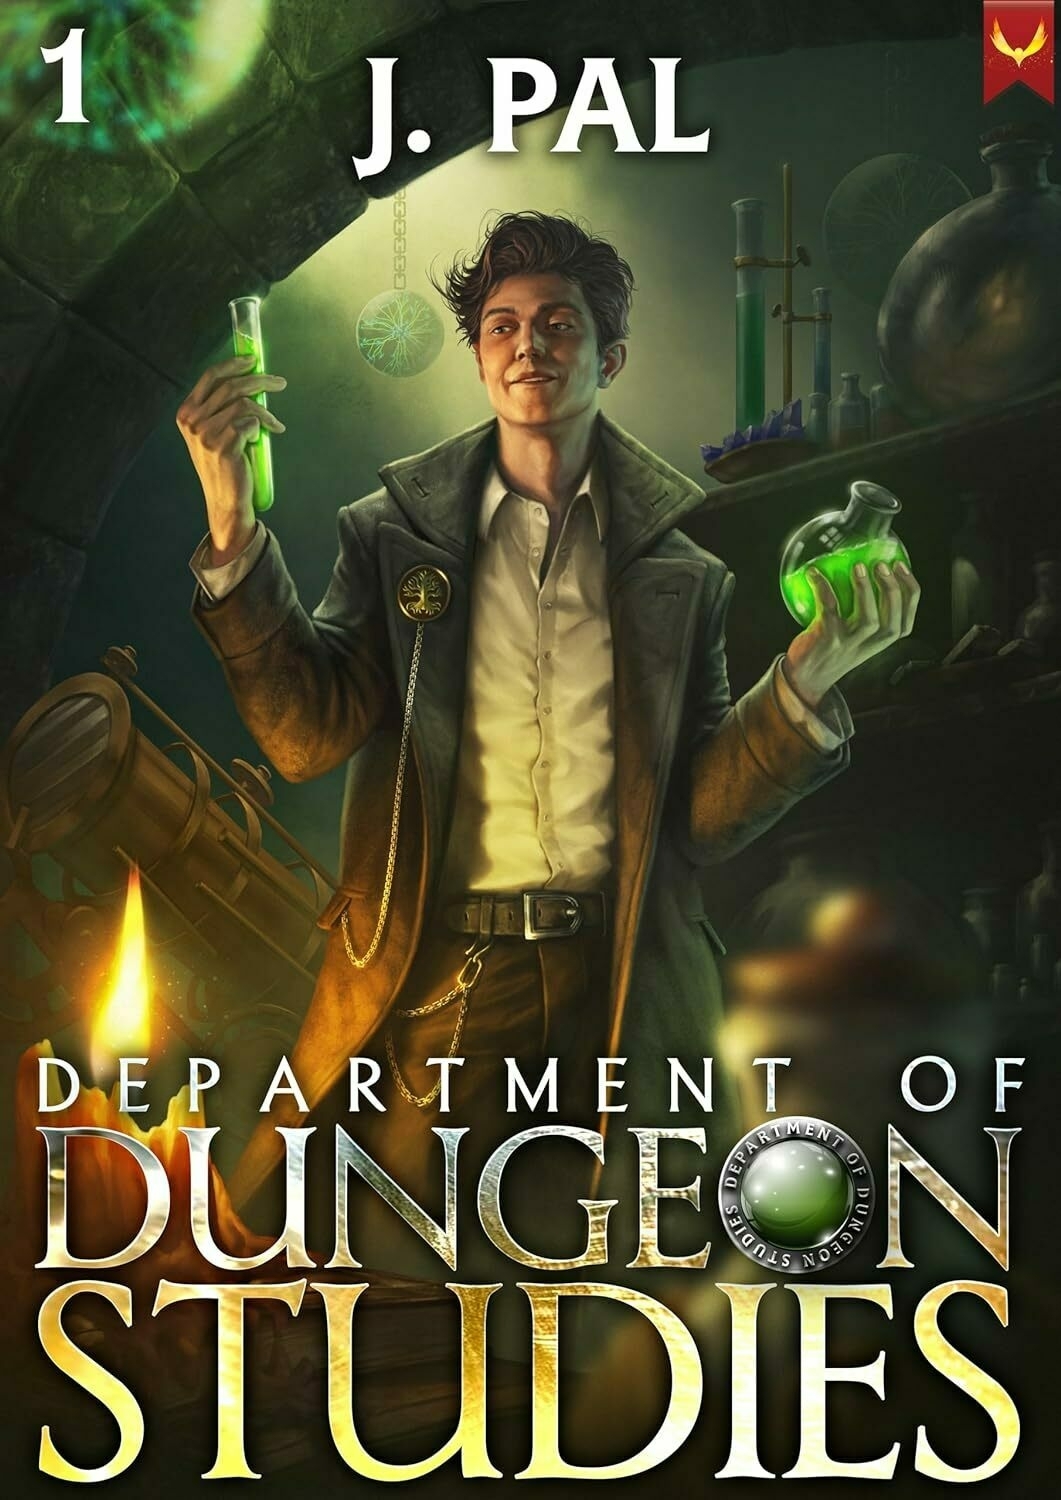 A smiling young man holds glowing vials in a stone-walled room filled with potion bottles, under the title 'Department of Dungeon Studies' and the author name 'J. PAL.'